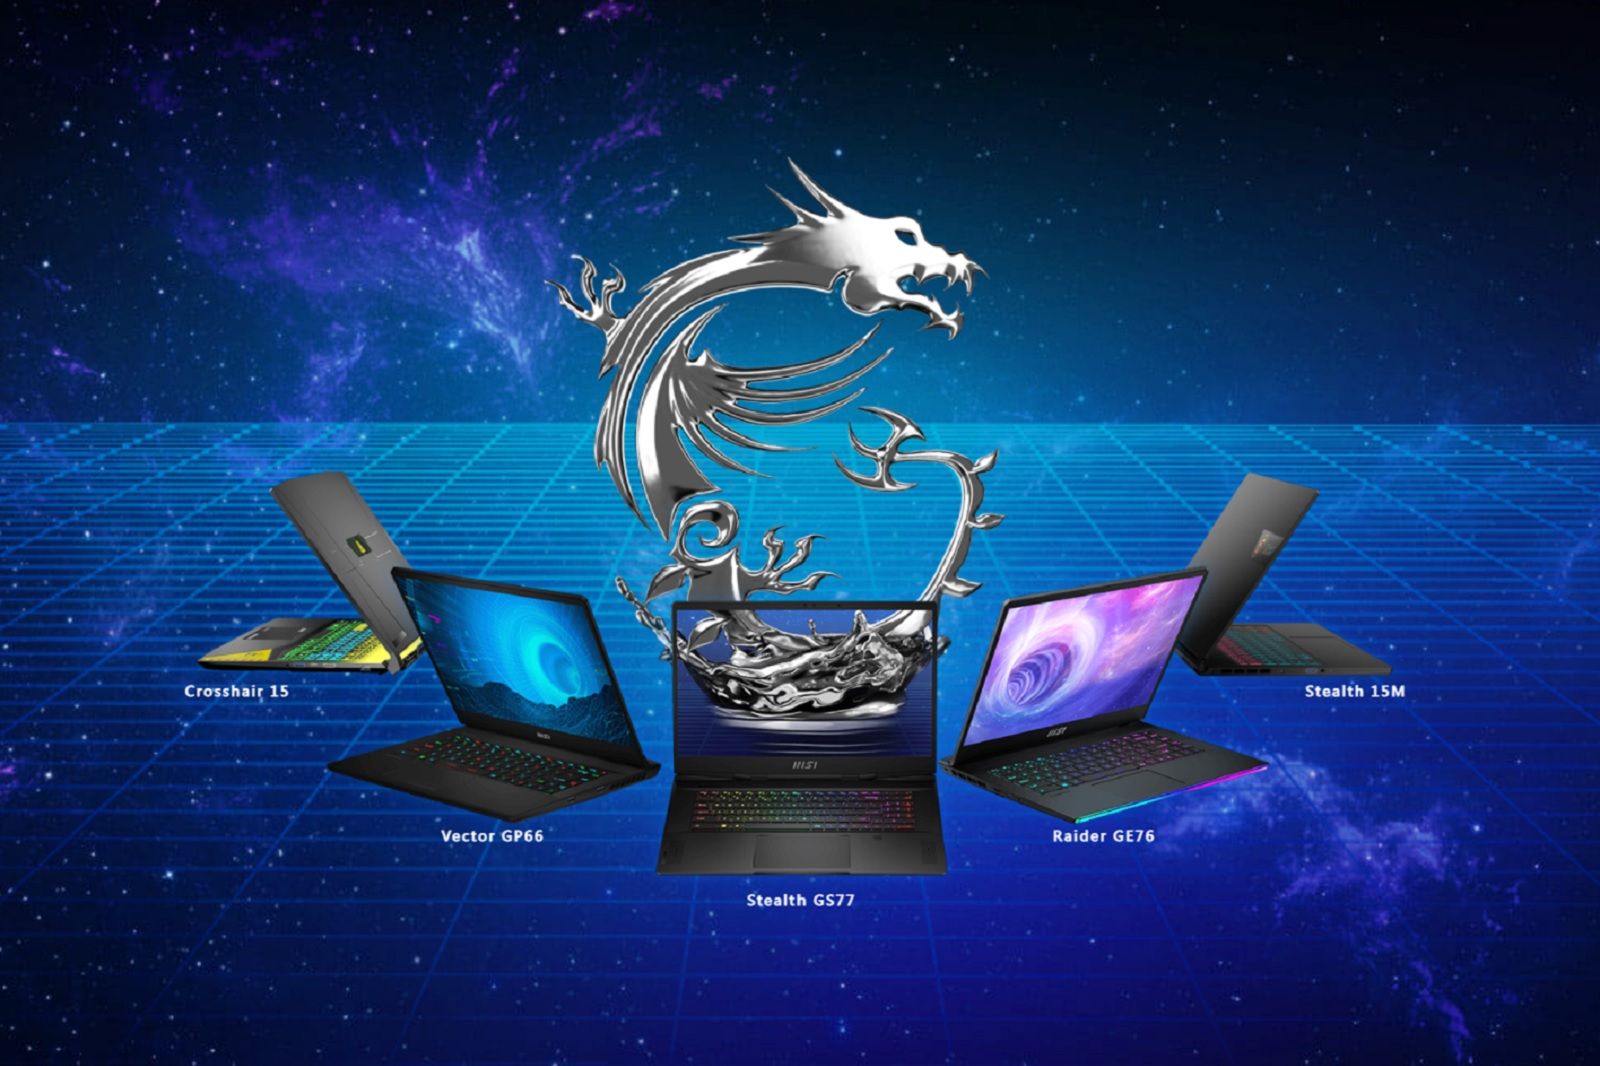 MSI reveals new gaming and creator laptops at CES 2022 photo 4